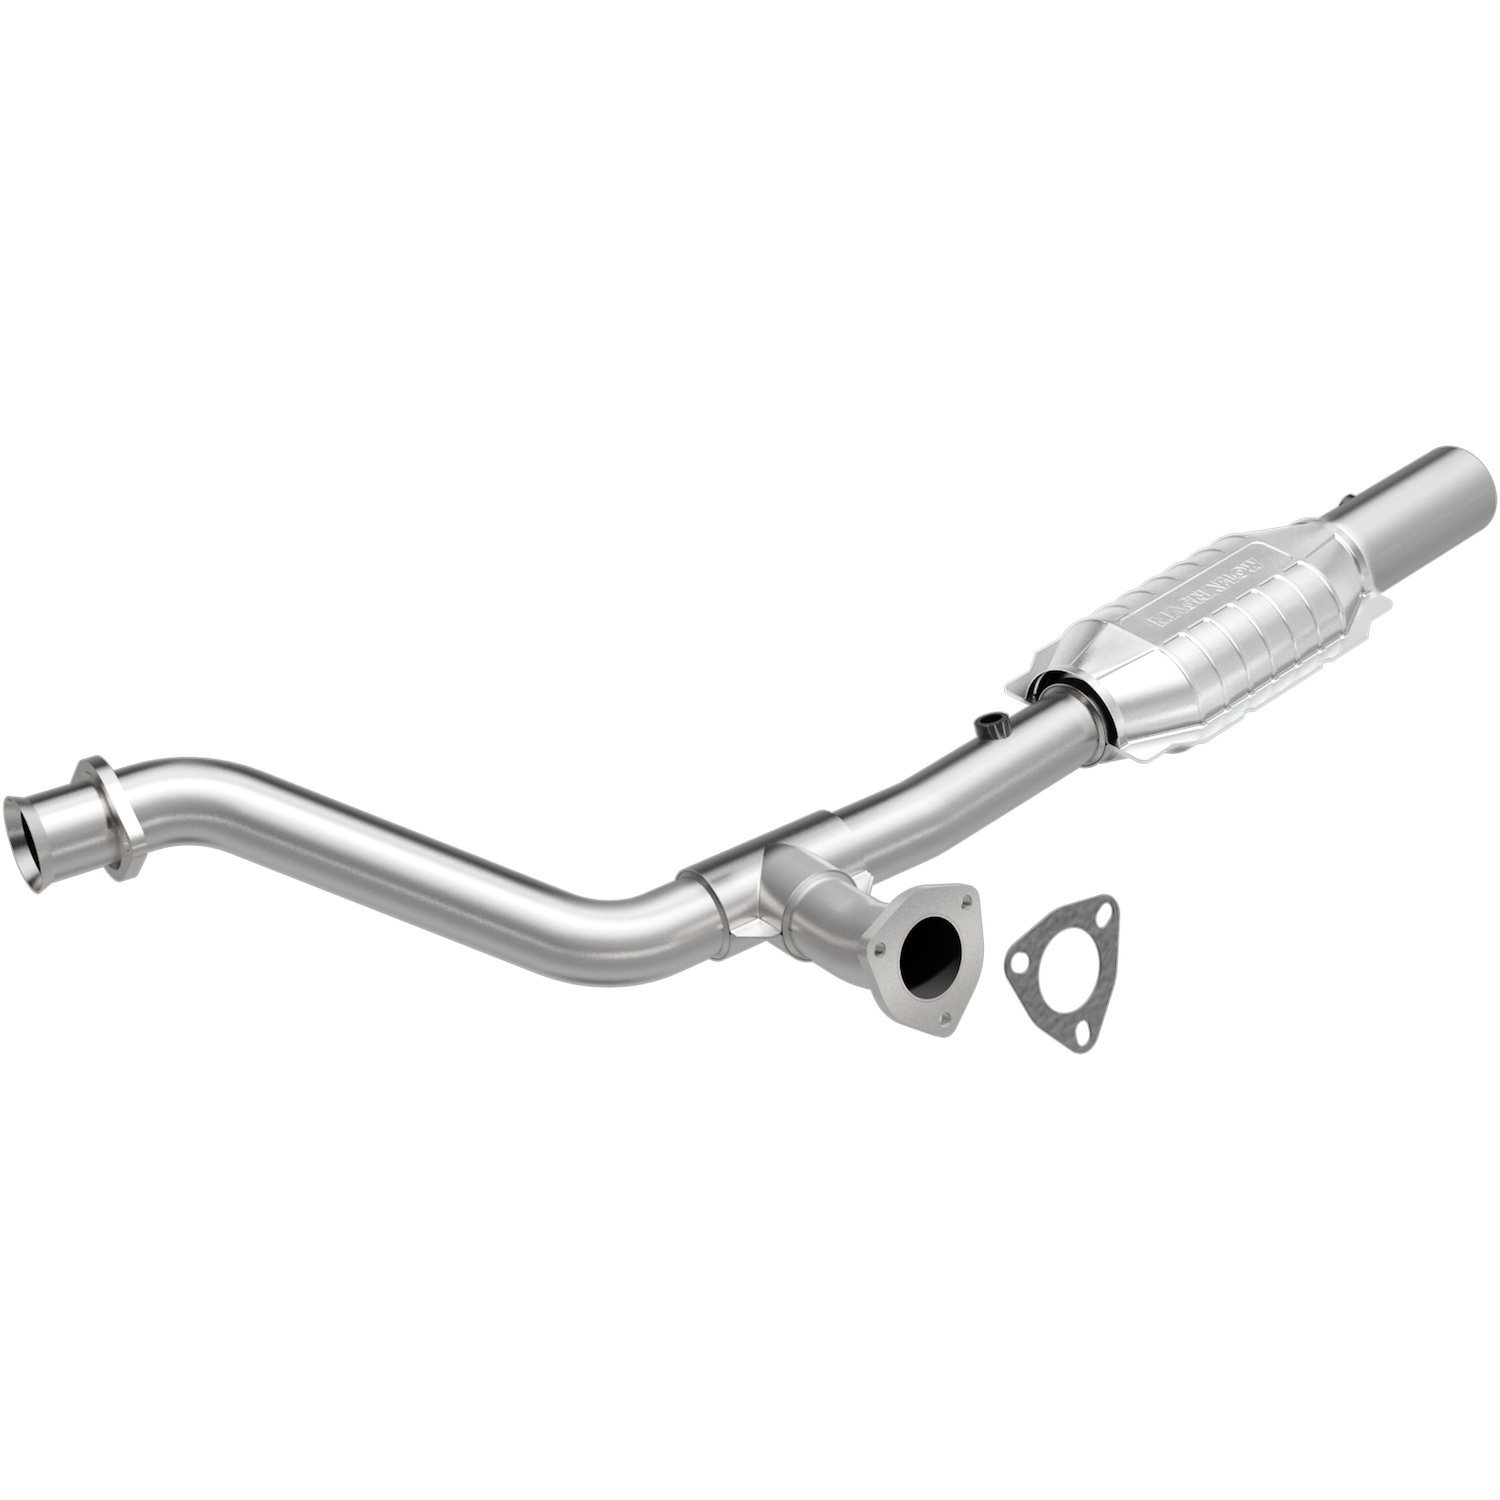 OEM Grade Federal / EPA Compliant Direct-Fit Catalytic Converter 49659